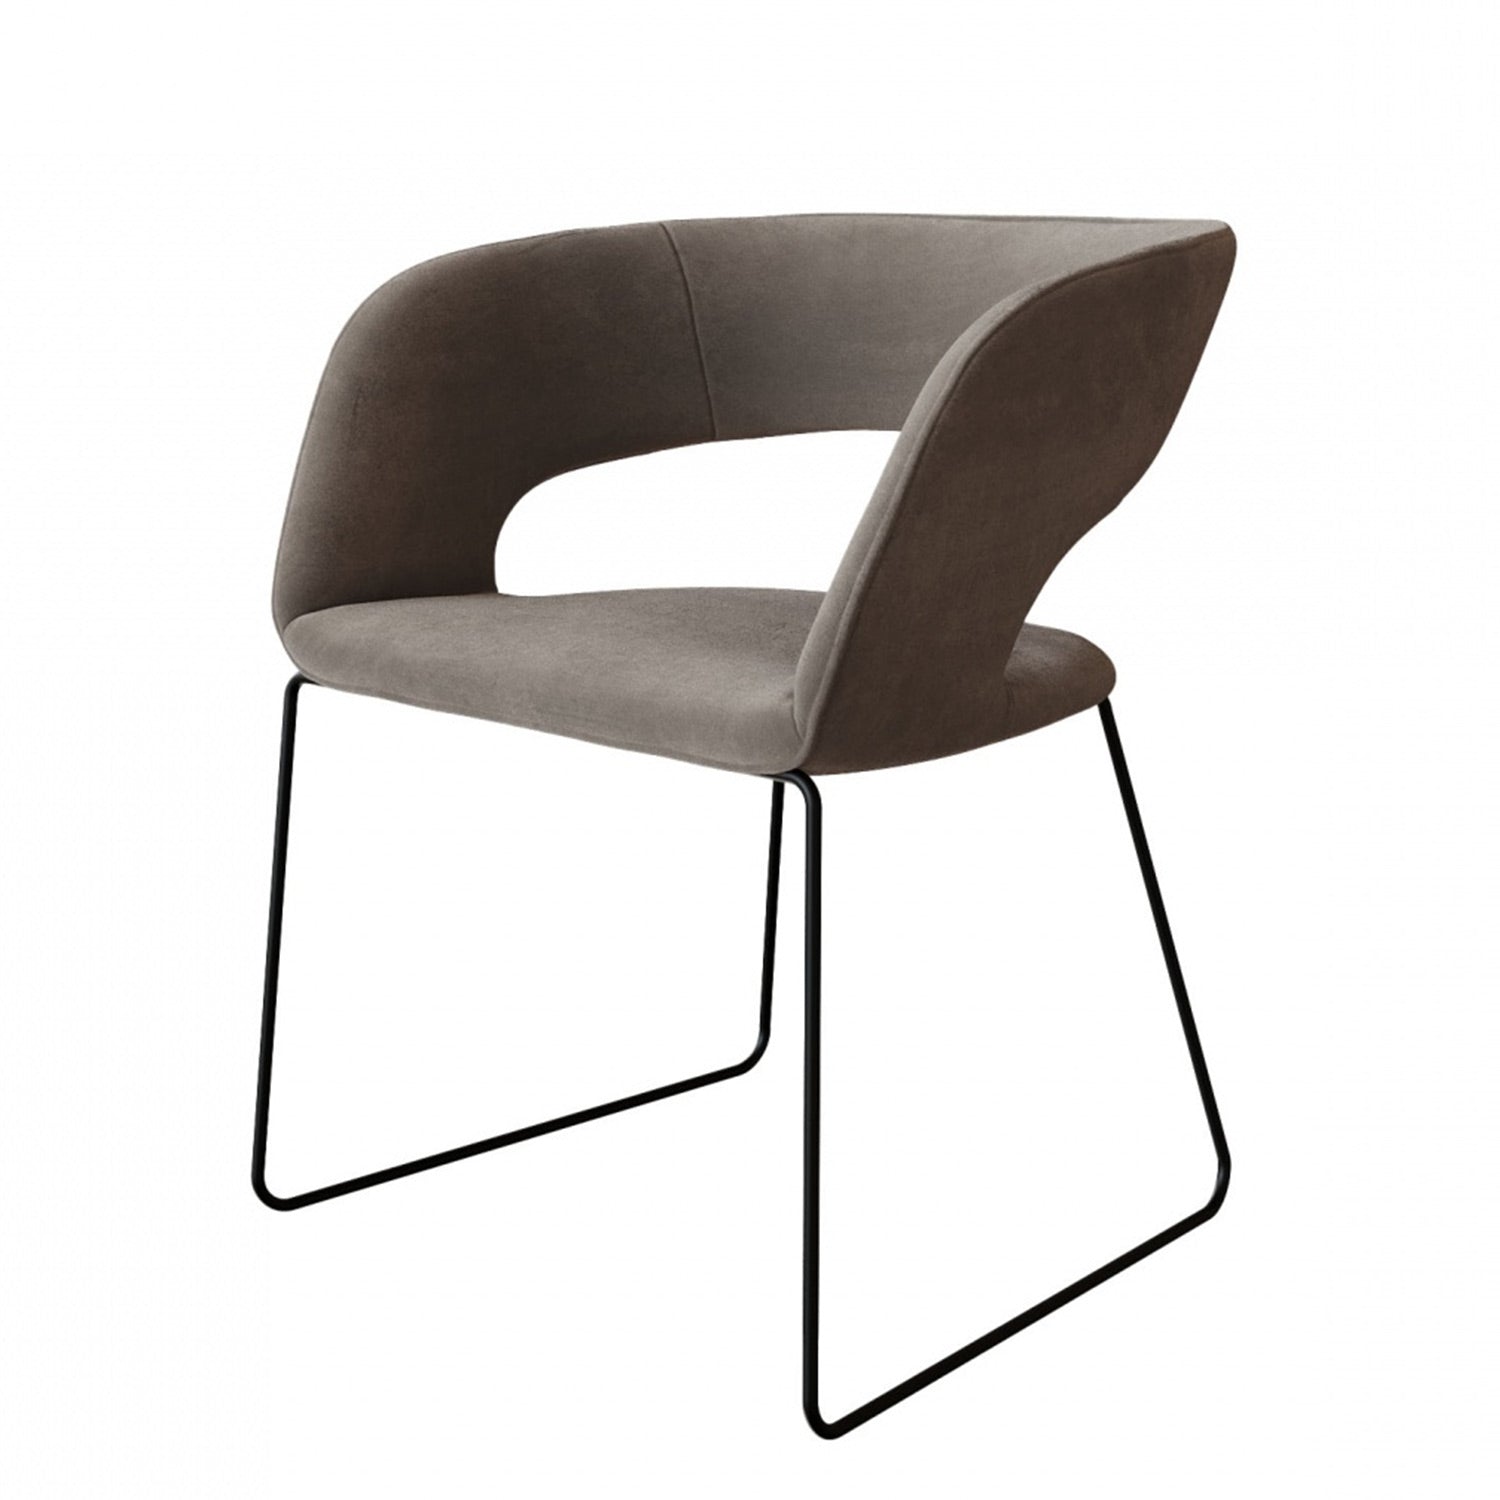 Aventino dining chair